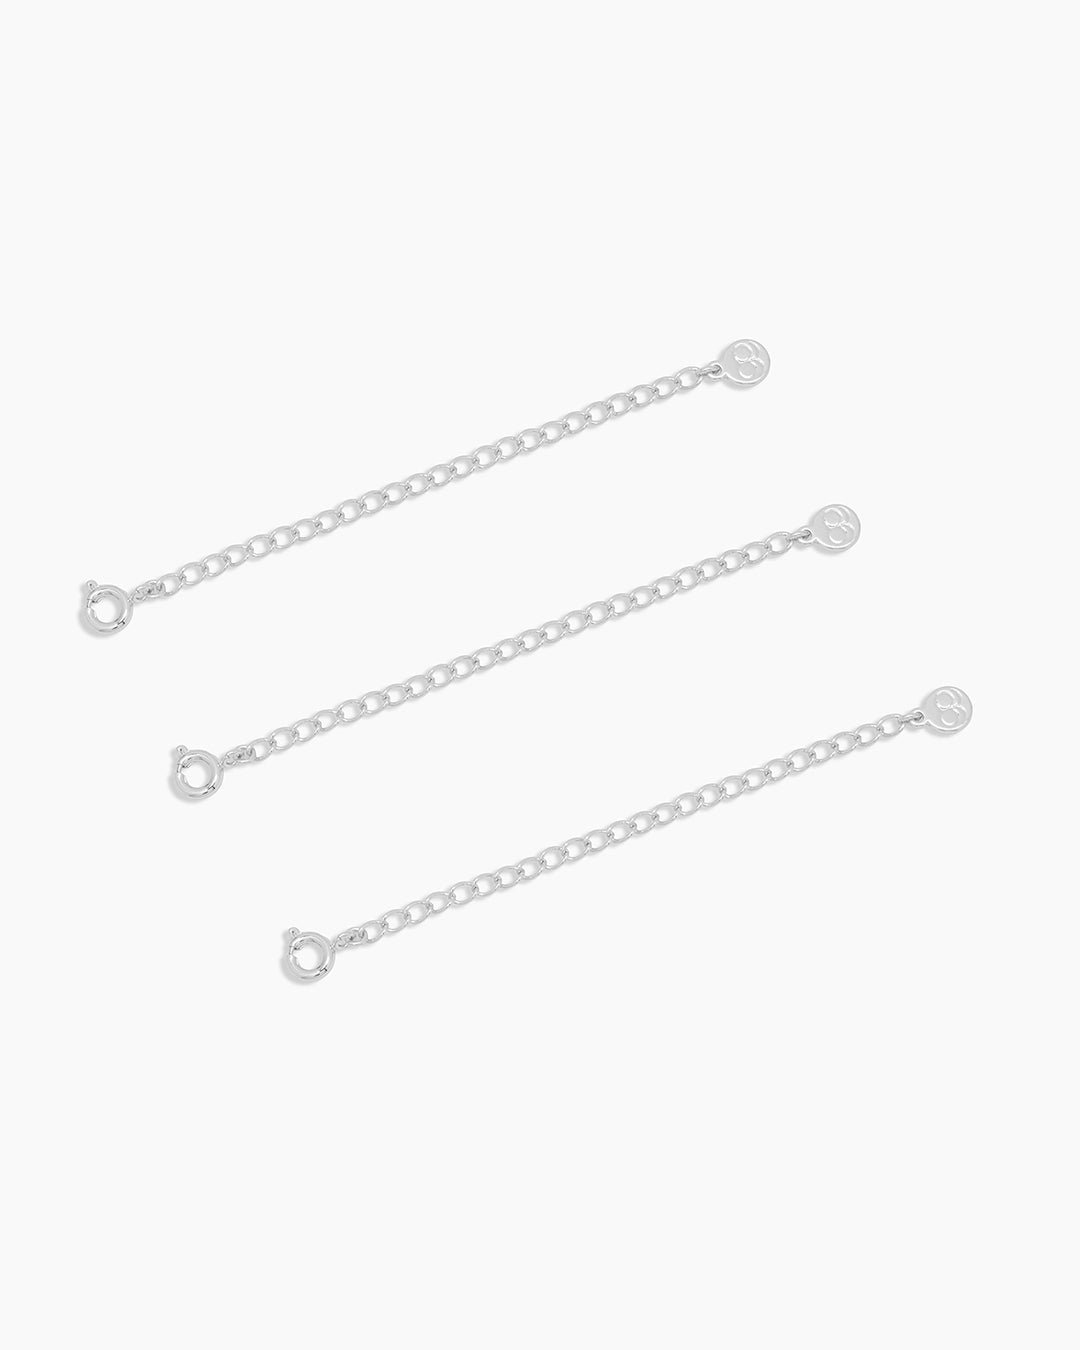 3" Necklace Extender set of 3 || option::Silver Plated